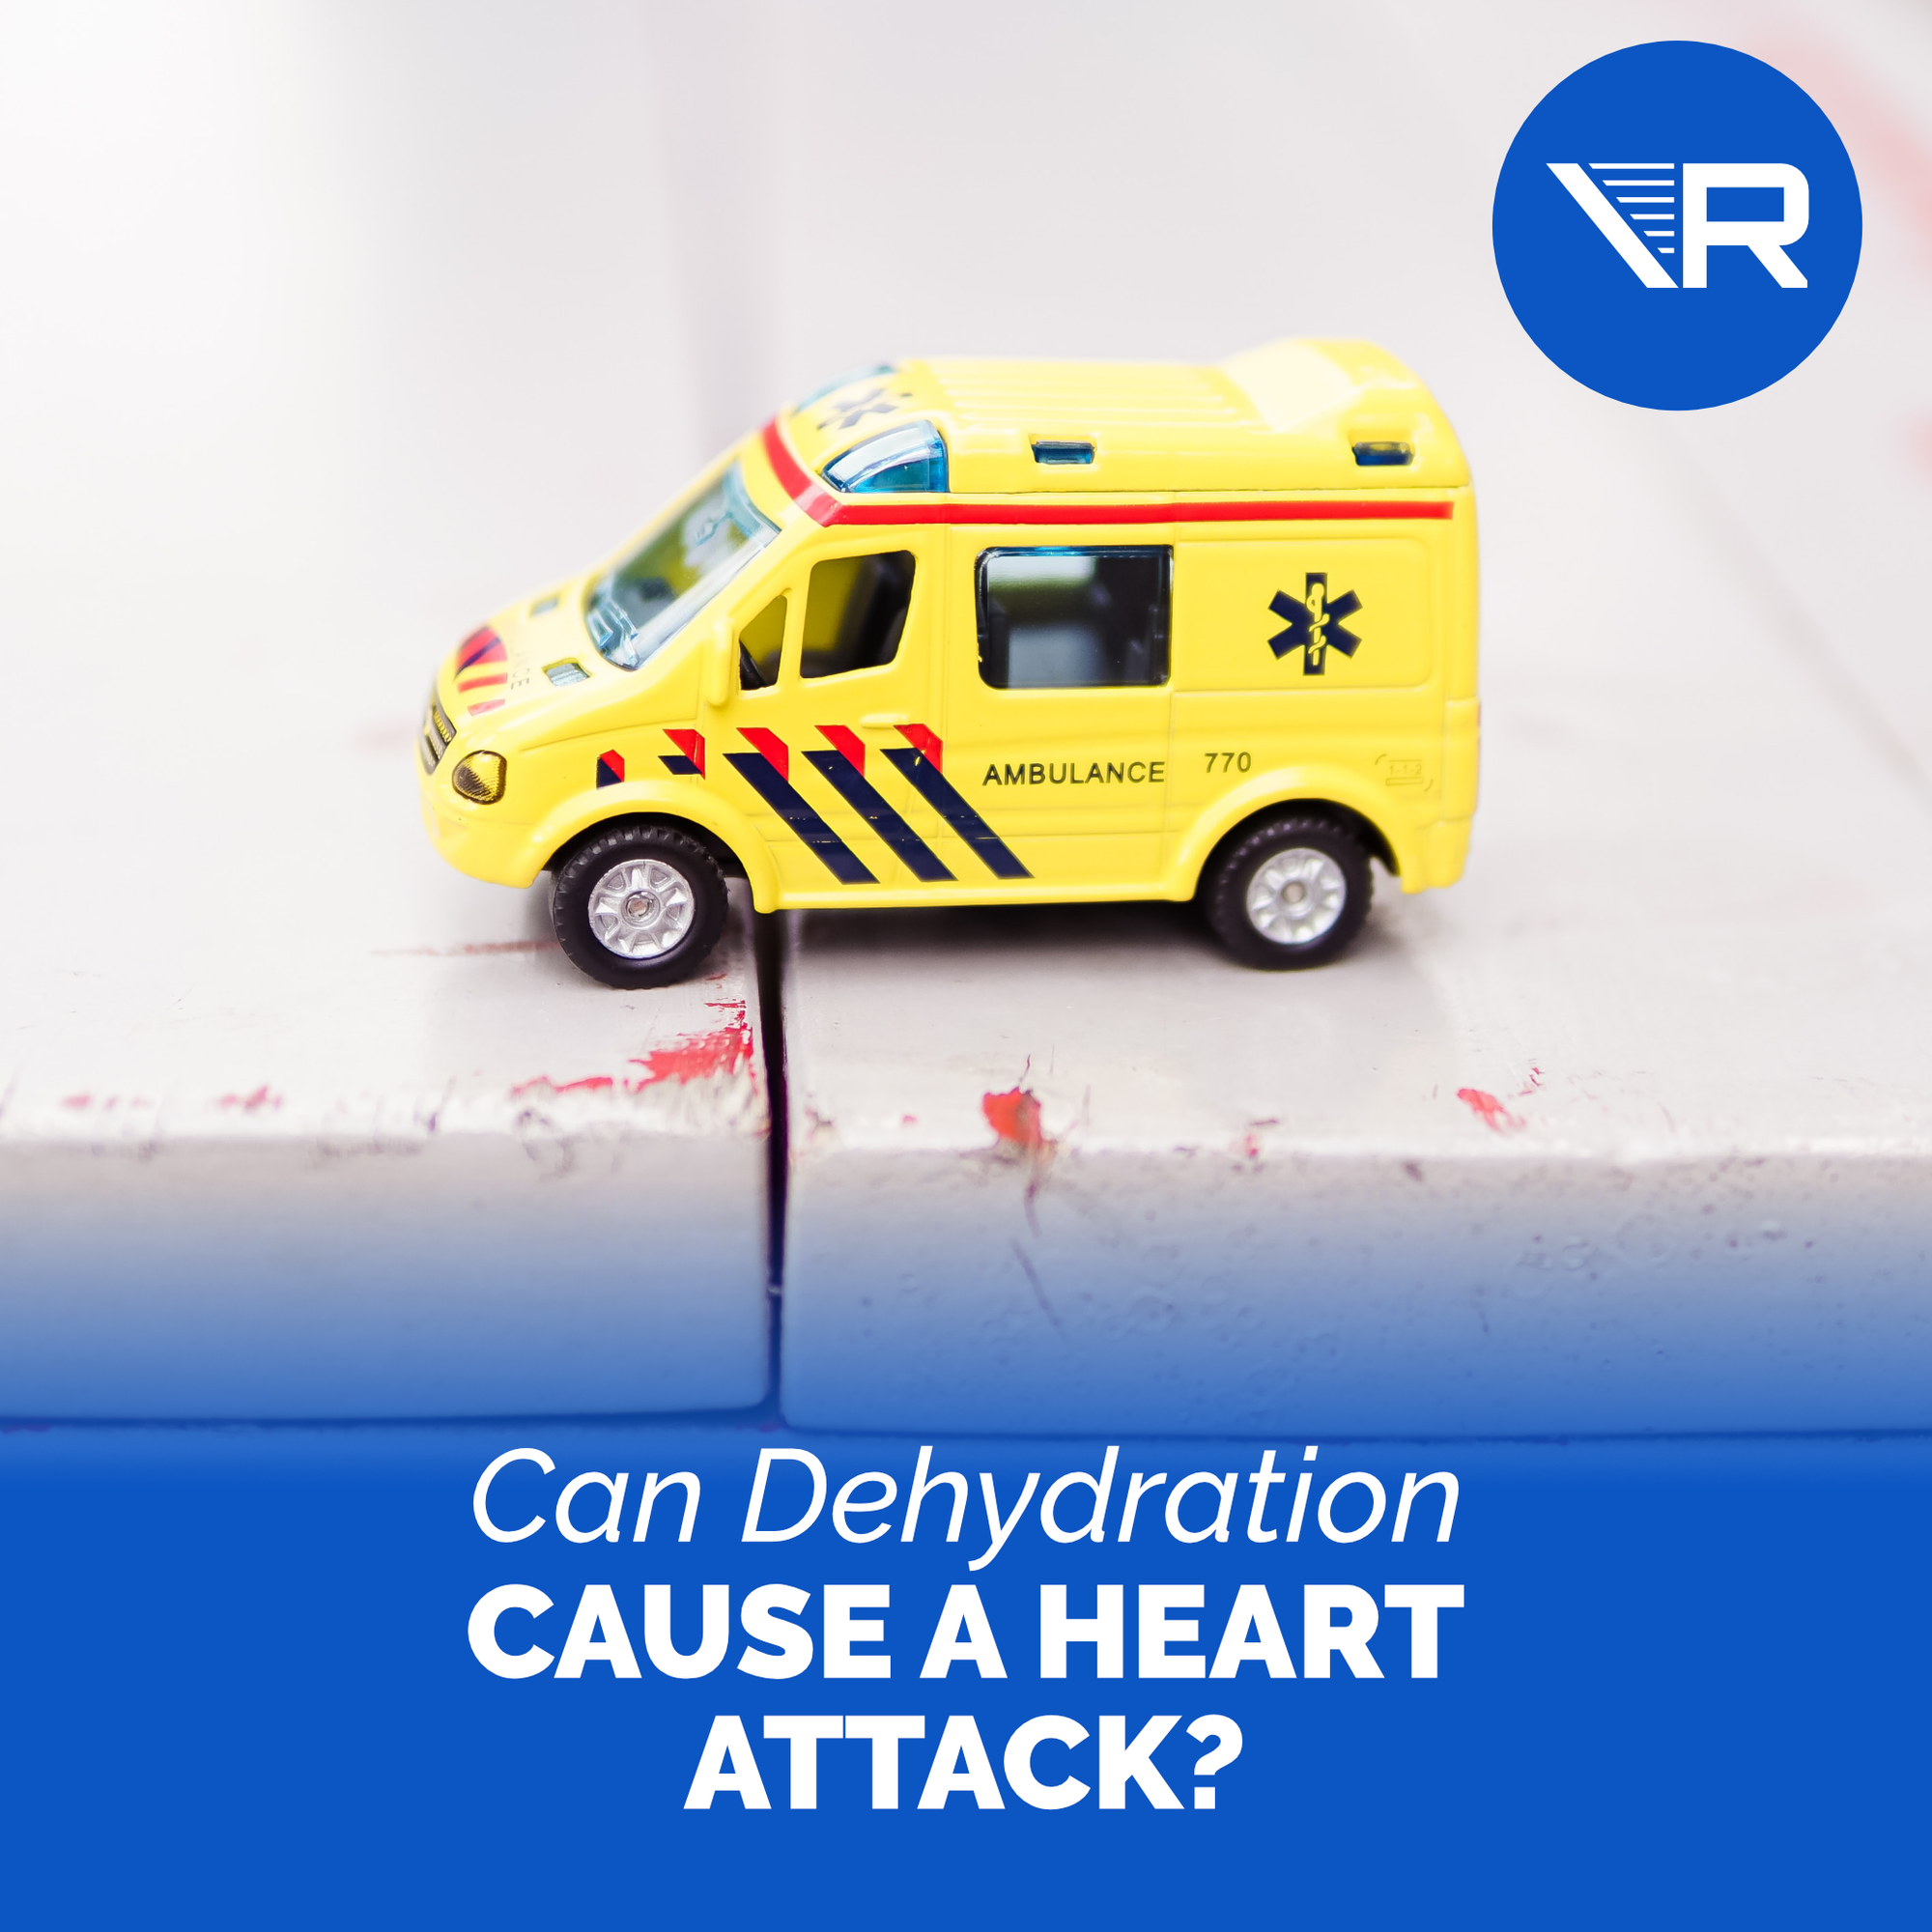 Can dehydration cause heart attack?